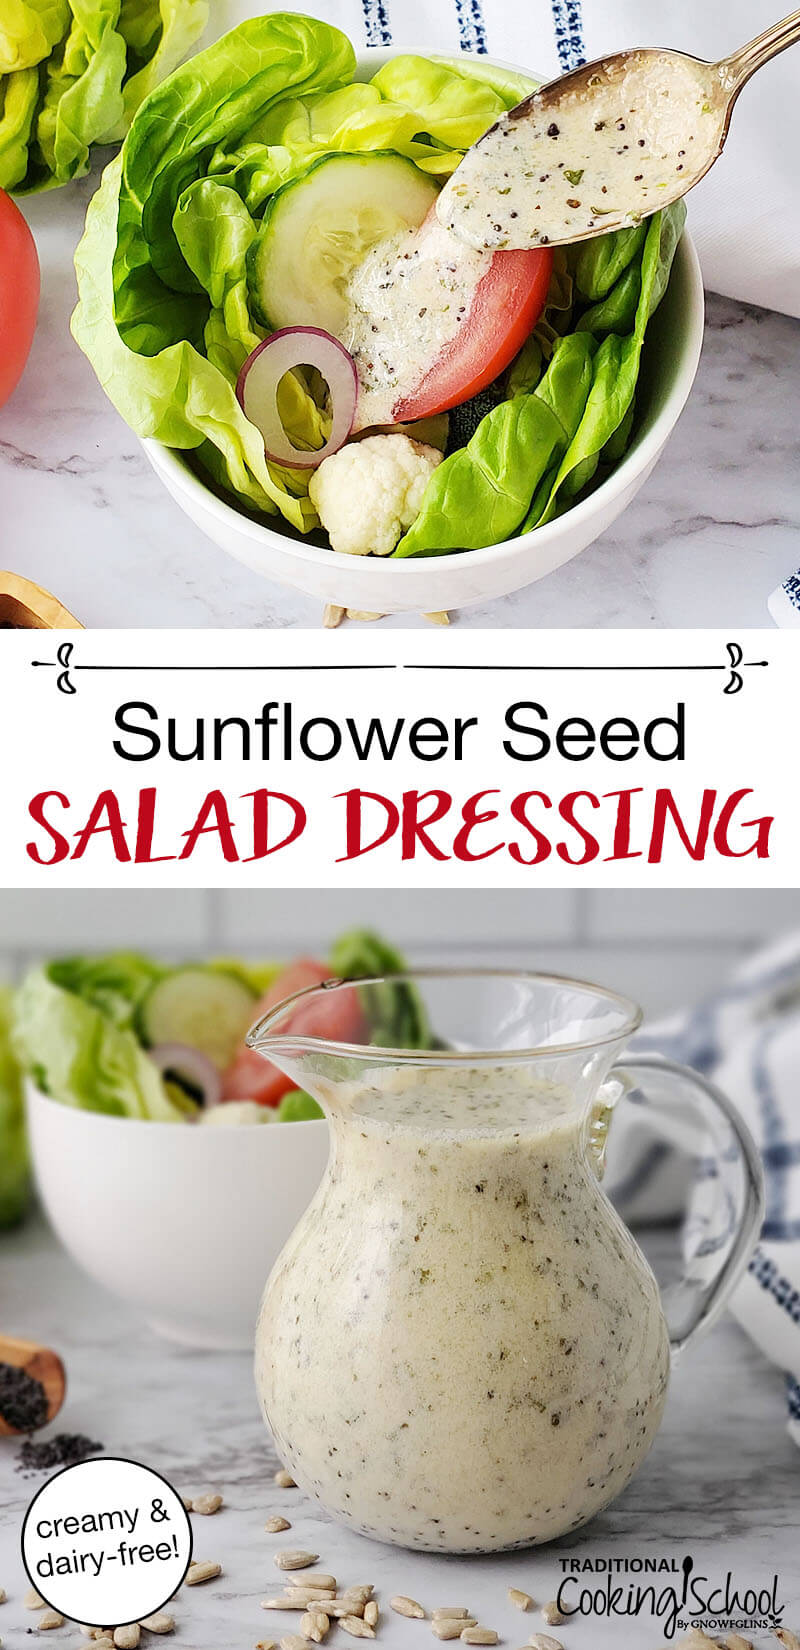 photo collage of a pitcher of light-colored dressing, and a spoon drizzling the dressing over a green salad, with text overlay: "Sunflower Seed Salad Dressing (creamy & dairy-free!)"